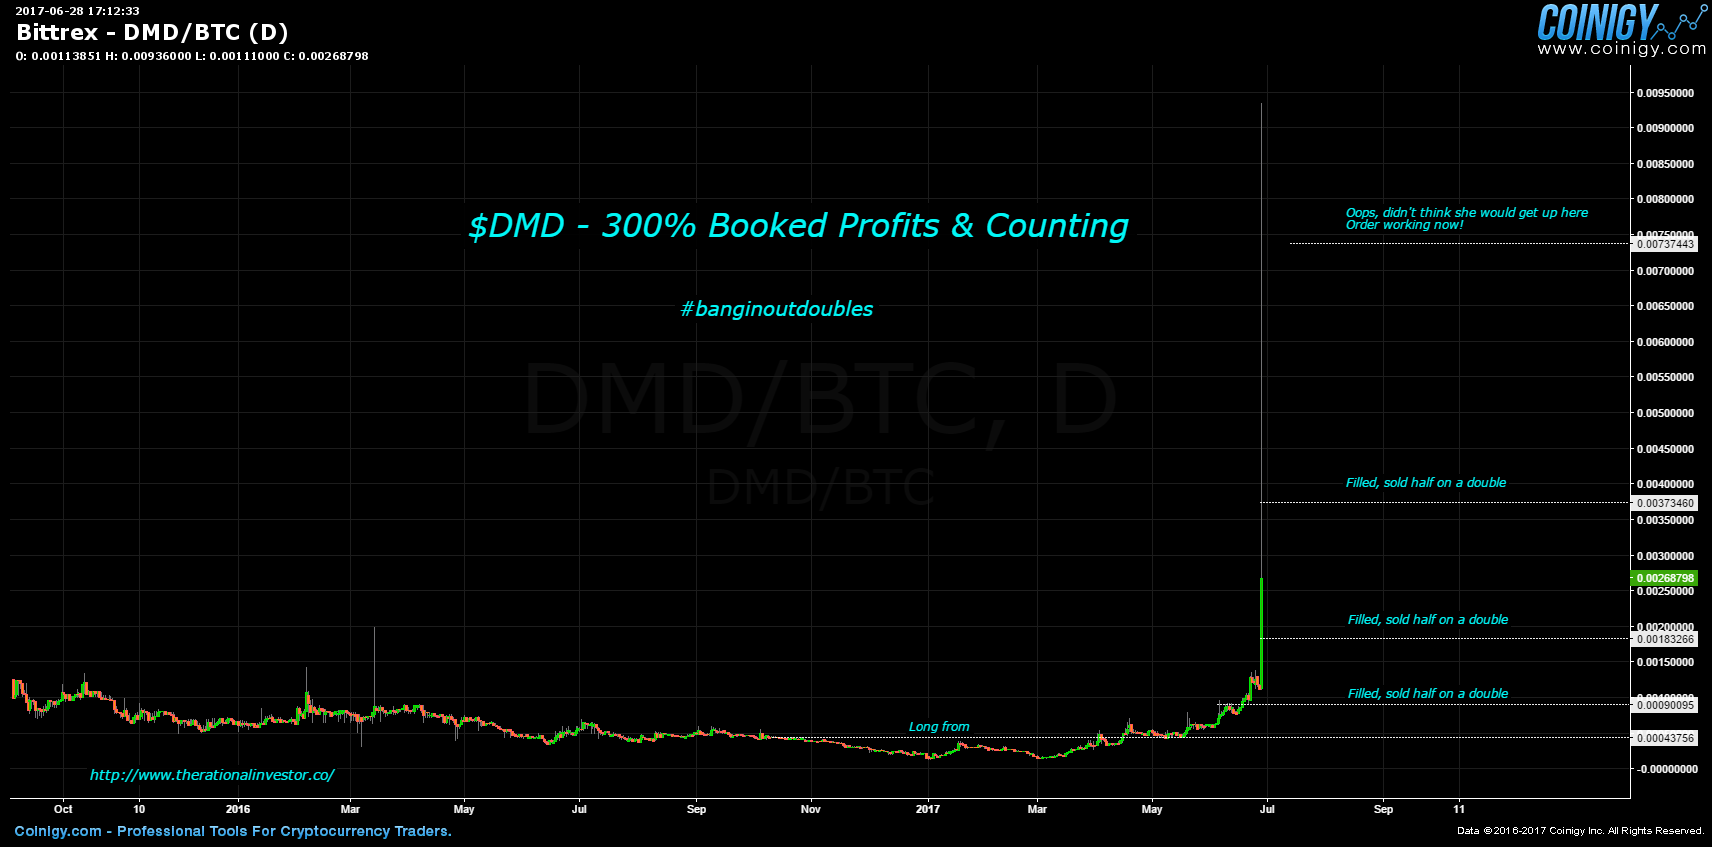 Bittrex DMD/BTC Chart - Published on Coinigy.com on June ...